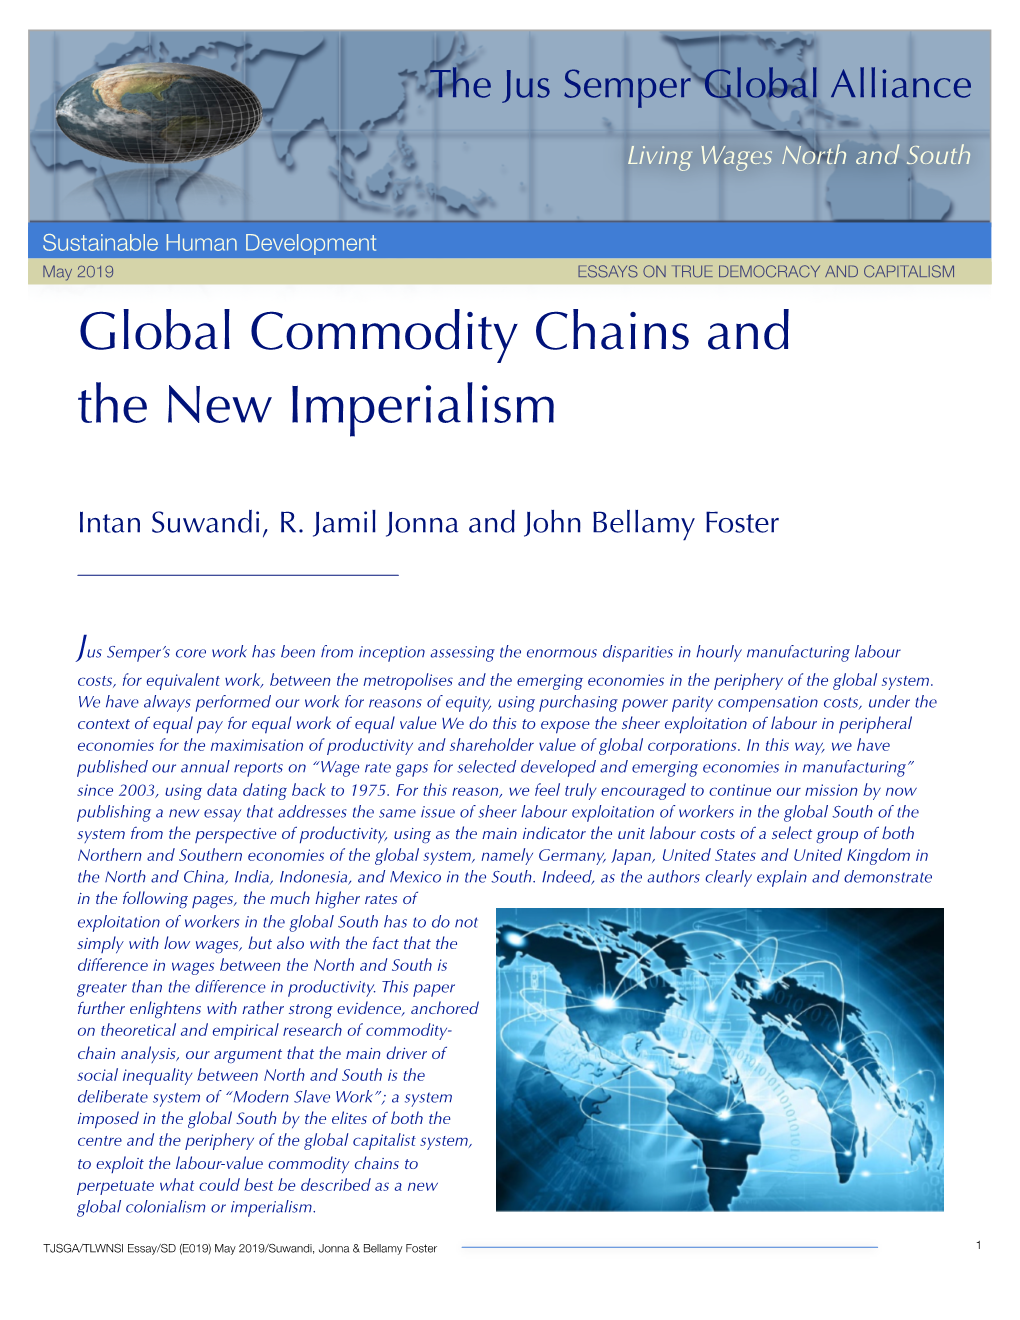 Global Commodity Chains and the New Imperialism